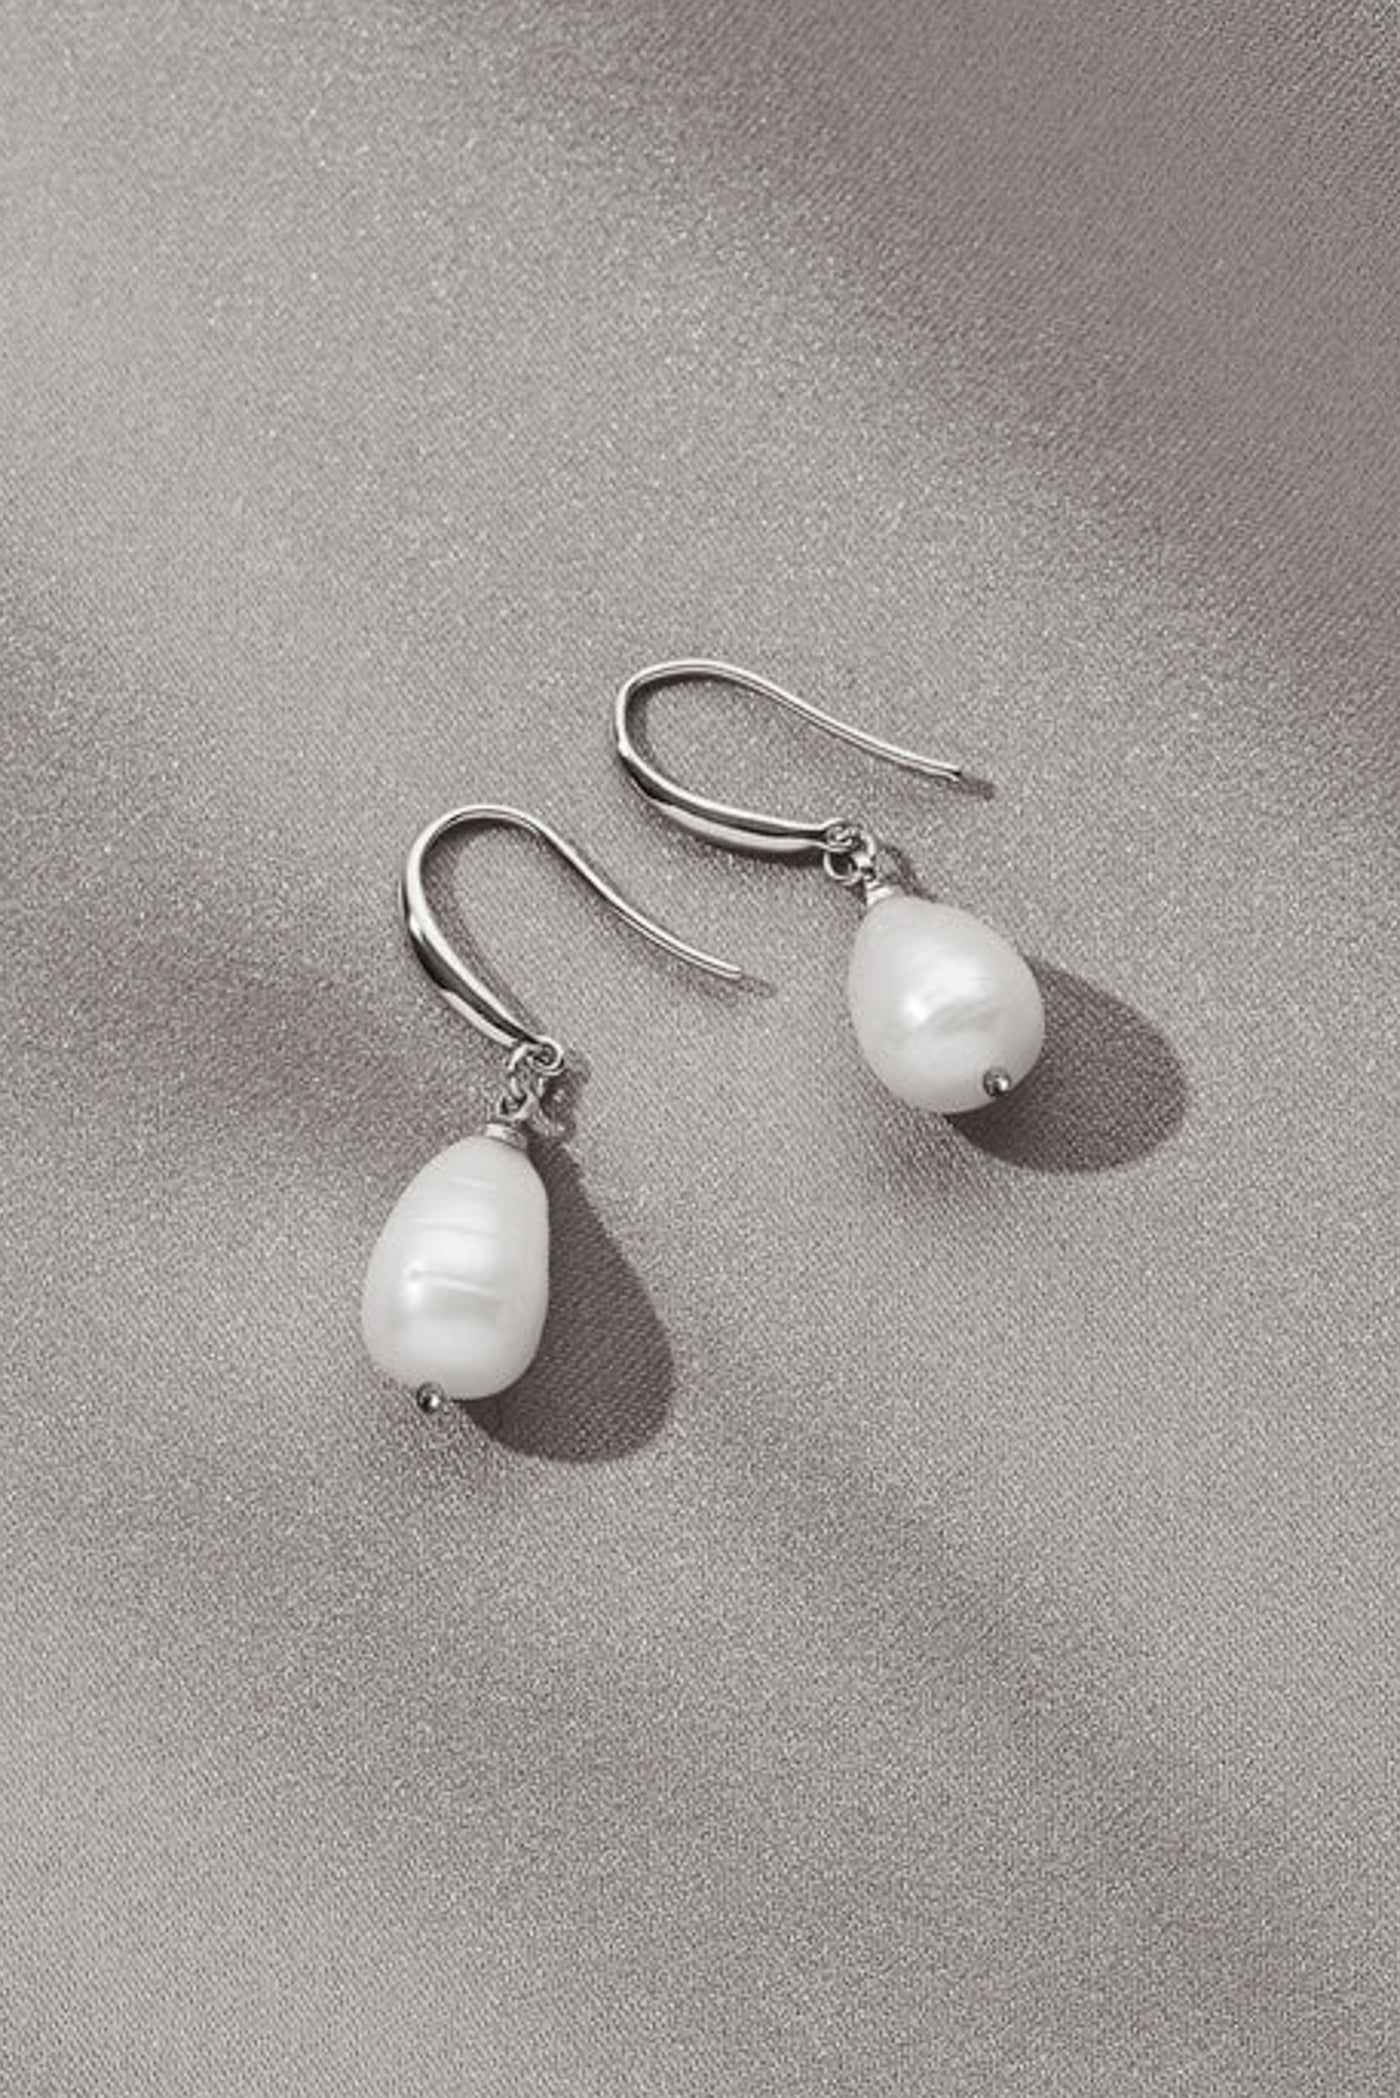 This is a basic shot of pearl drop earrings, perfect for a bride.